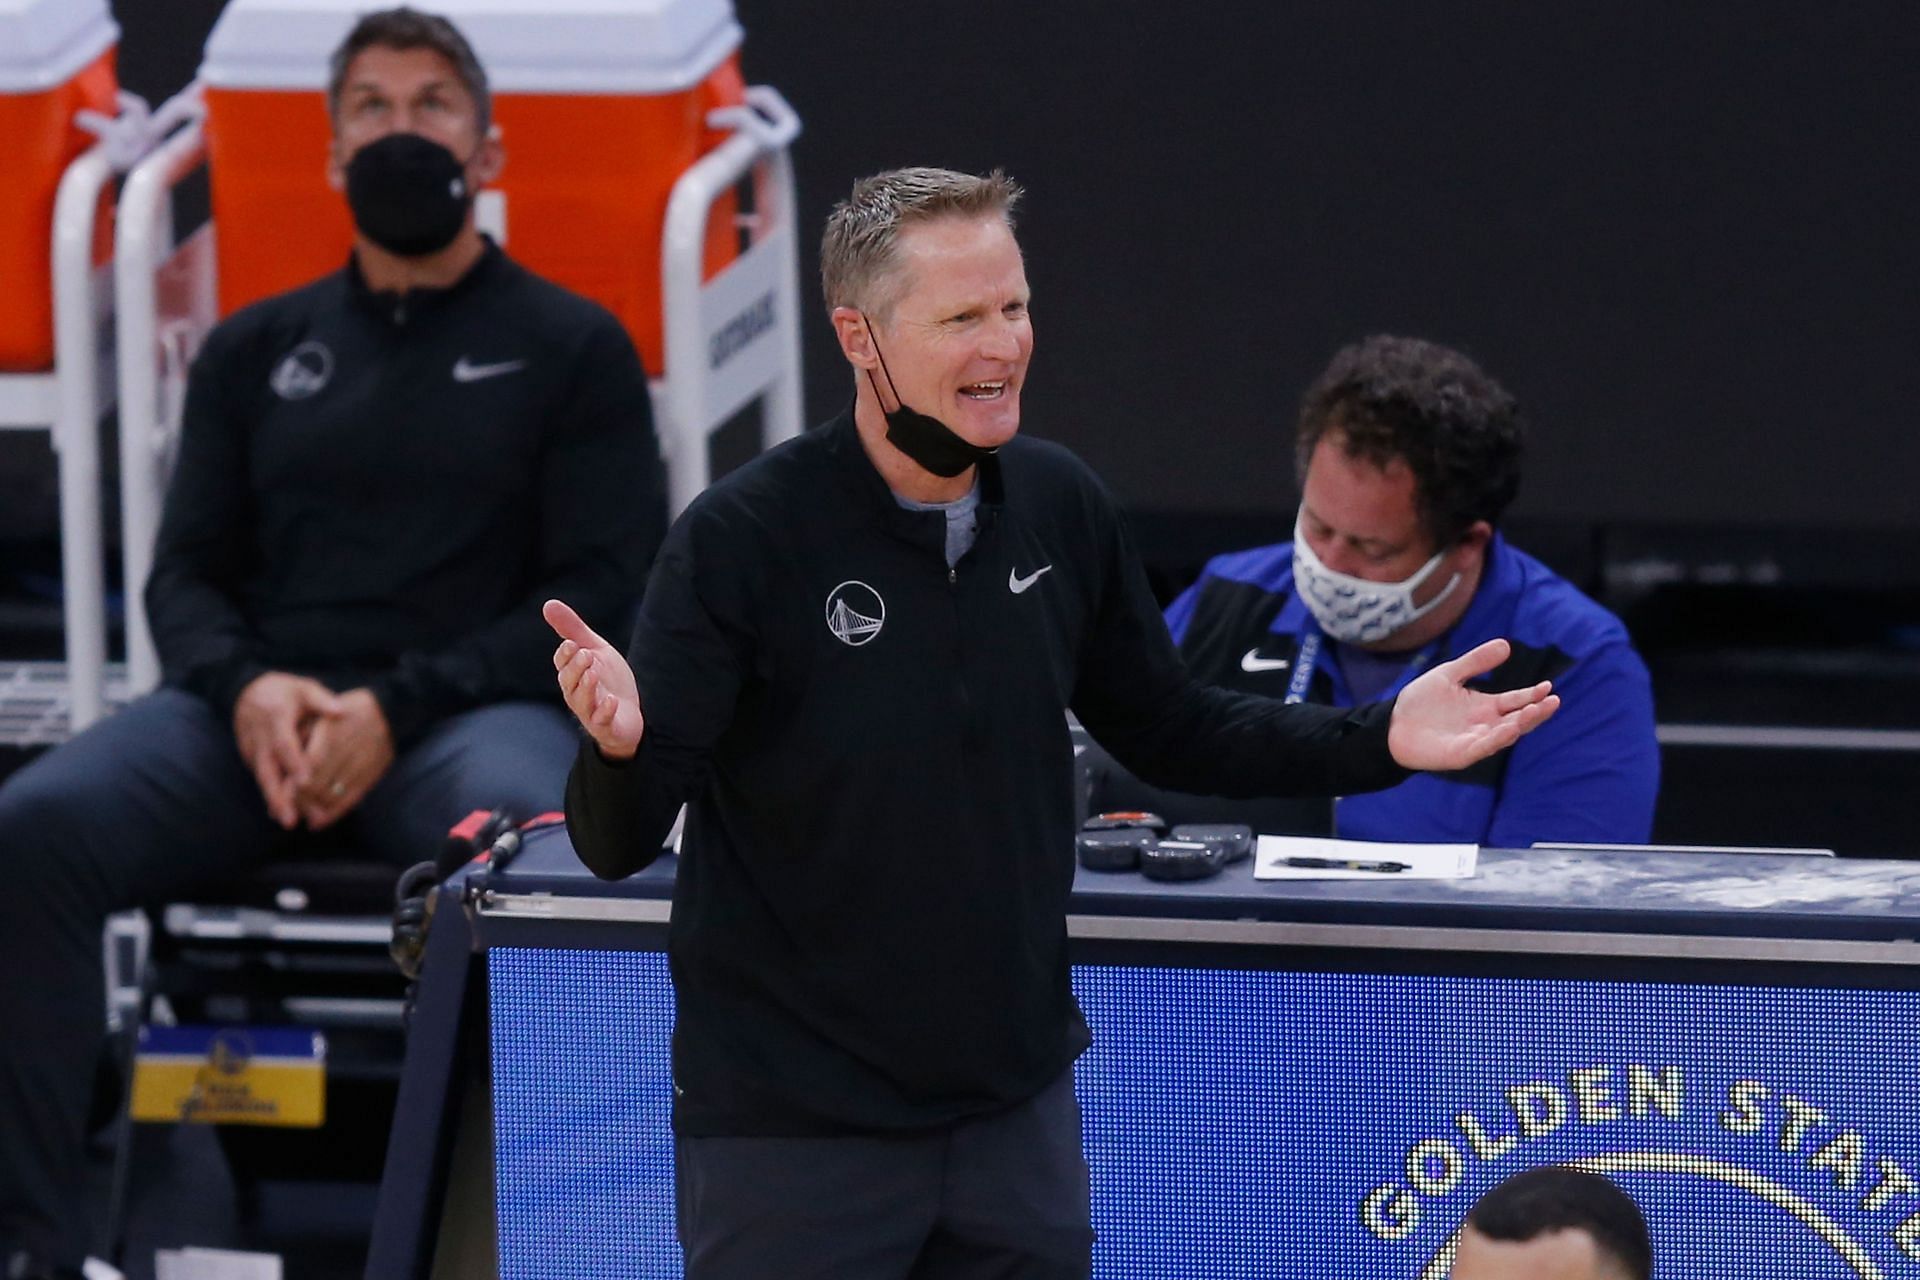 Head coach of the Golden State Warriors Steve Kerr talks to the referee in the second quarter of the NBA Play-In Tournament game against the Memphis Grizzlies at Chase Center on May 21, 2021 in San Francisco, California.